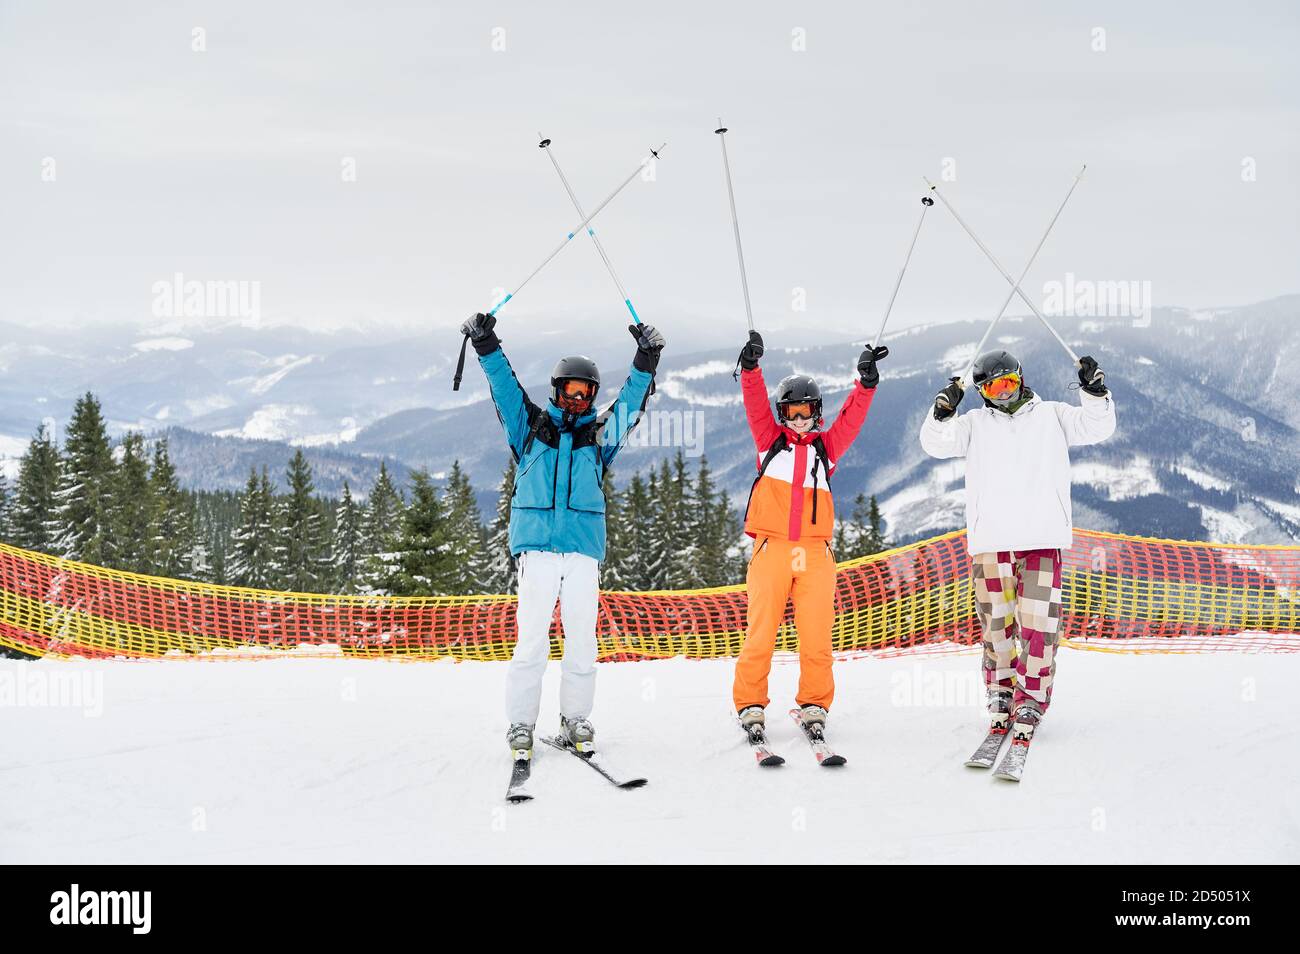 Three cheerful tourists posing on snowy slope against mountainous background, holding their ski poles up above. Friends at high spirits having fun at ski resort. Concept of winter sport and friendship Stock Photo